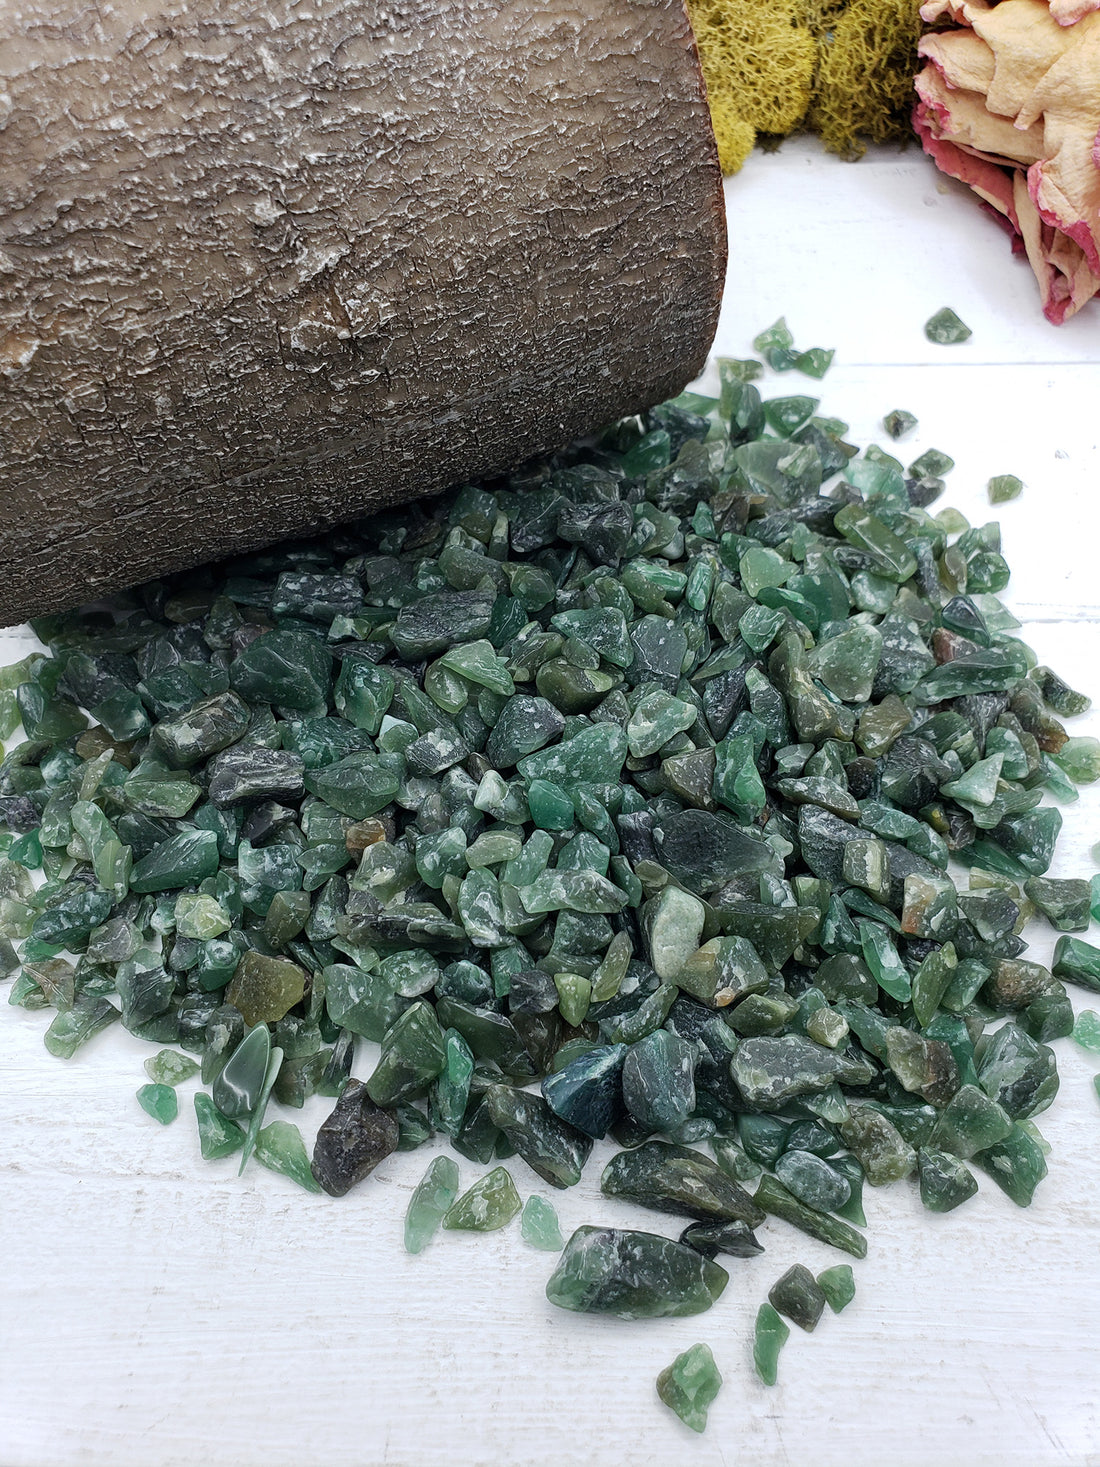 Six ounces of green aventurine crystals on display